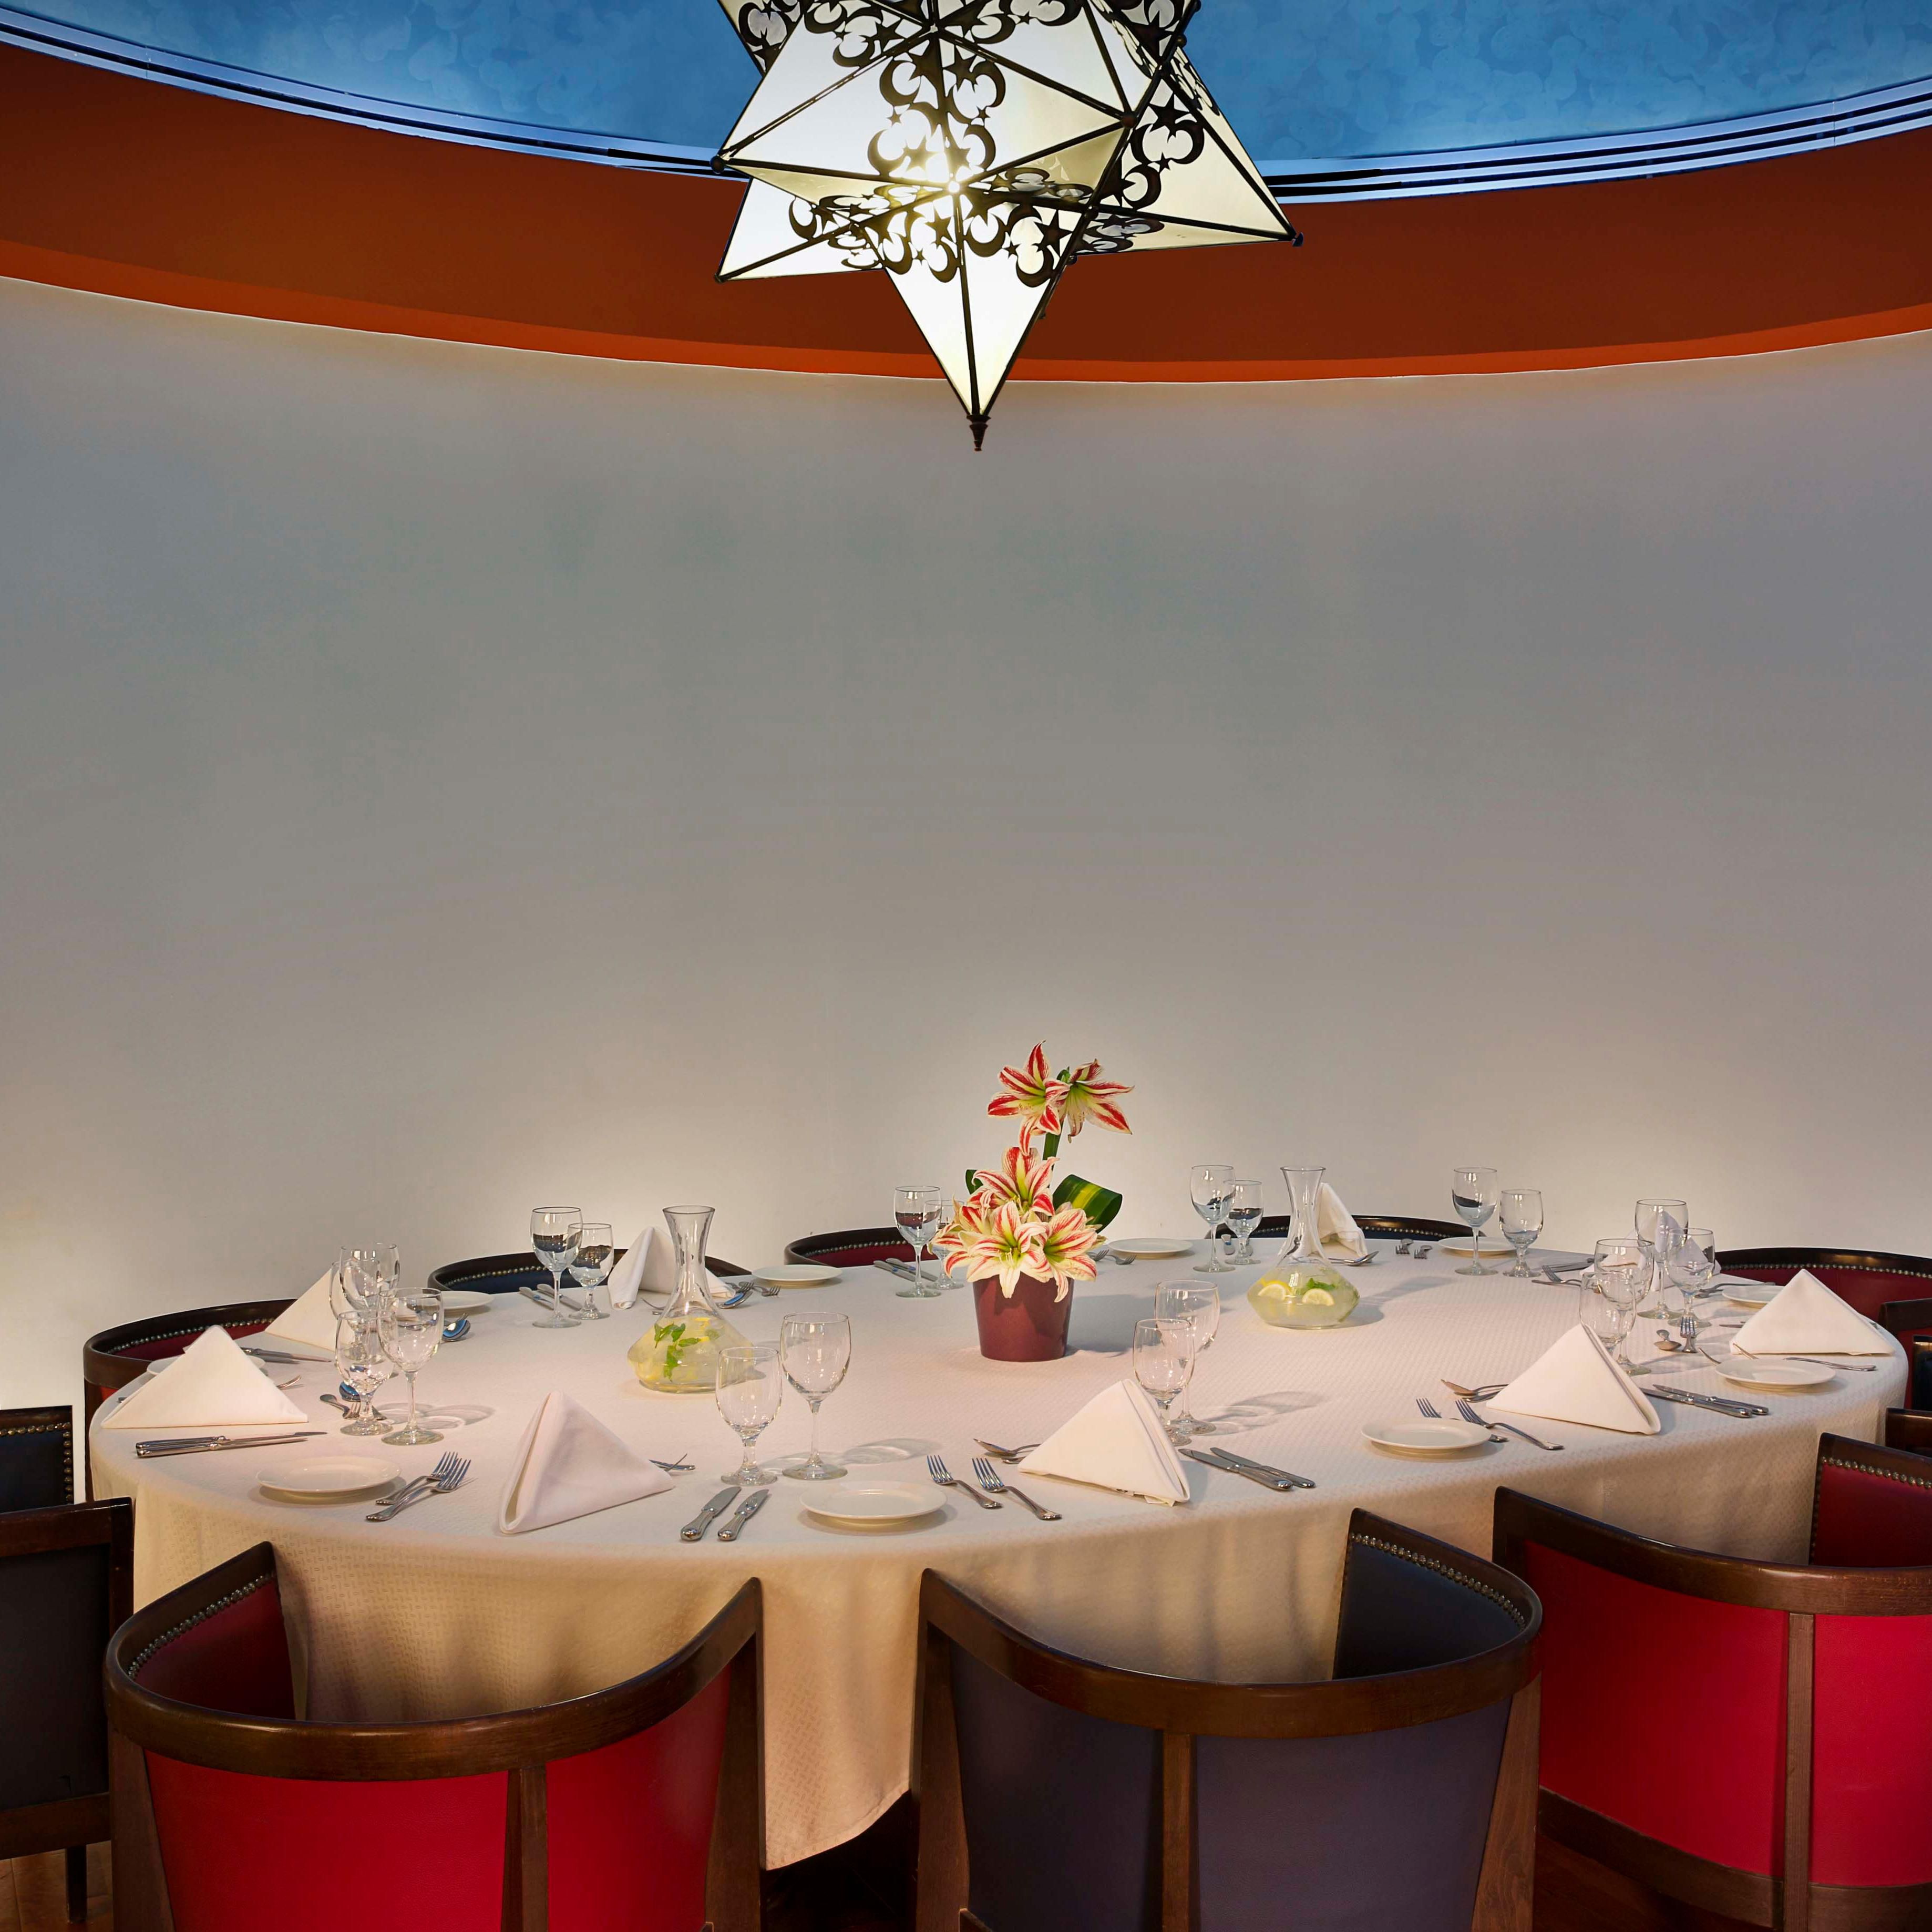 A private dining experience for special occasions